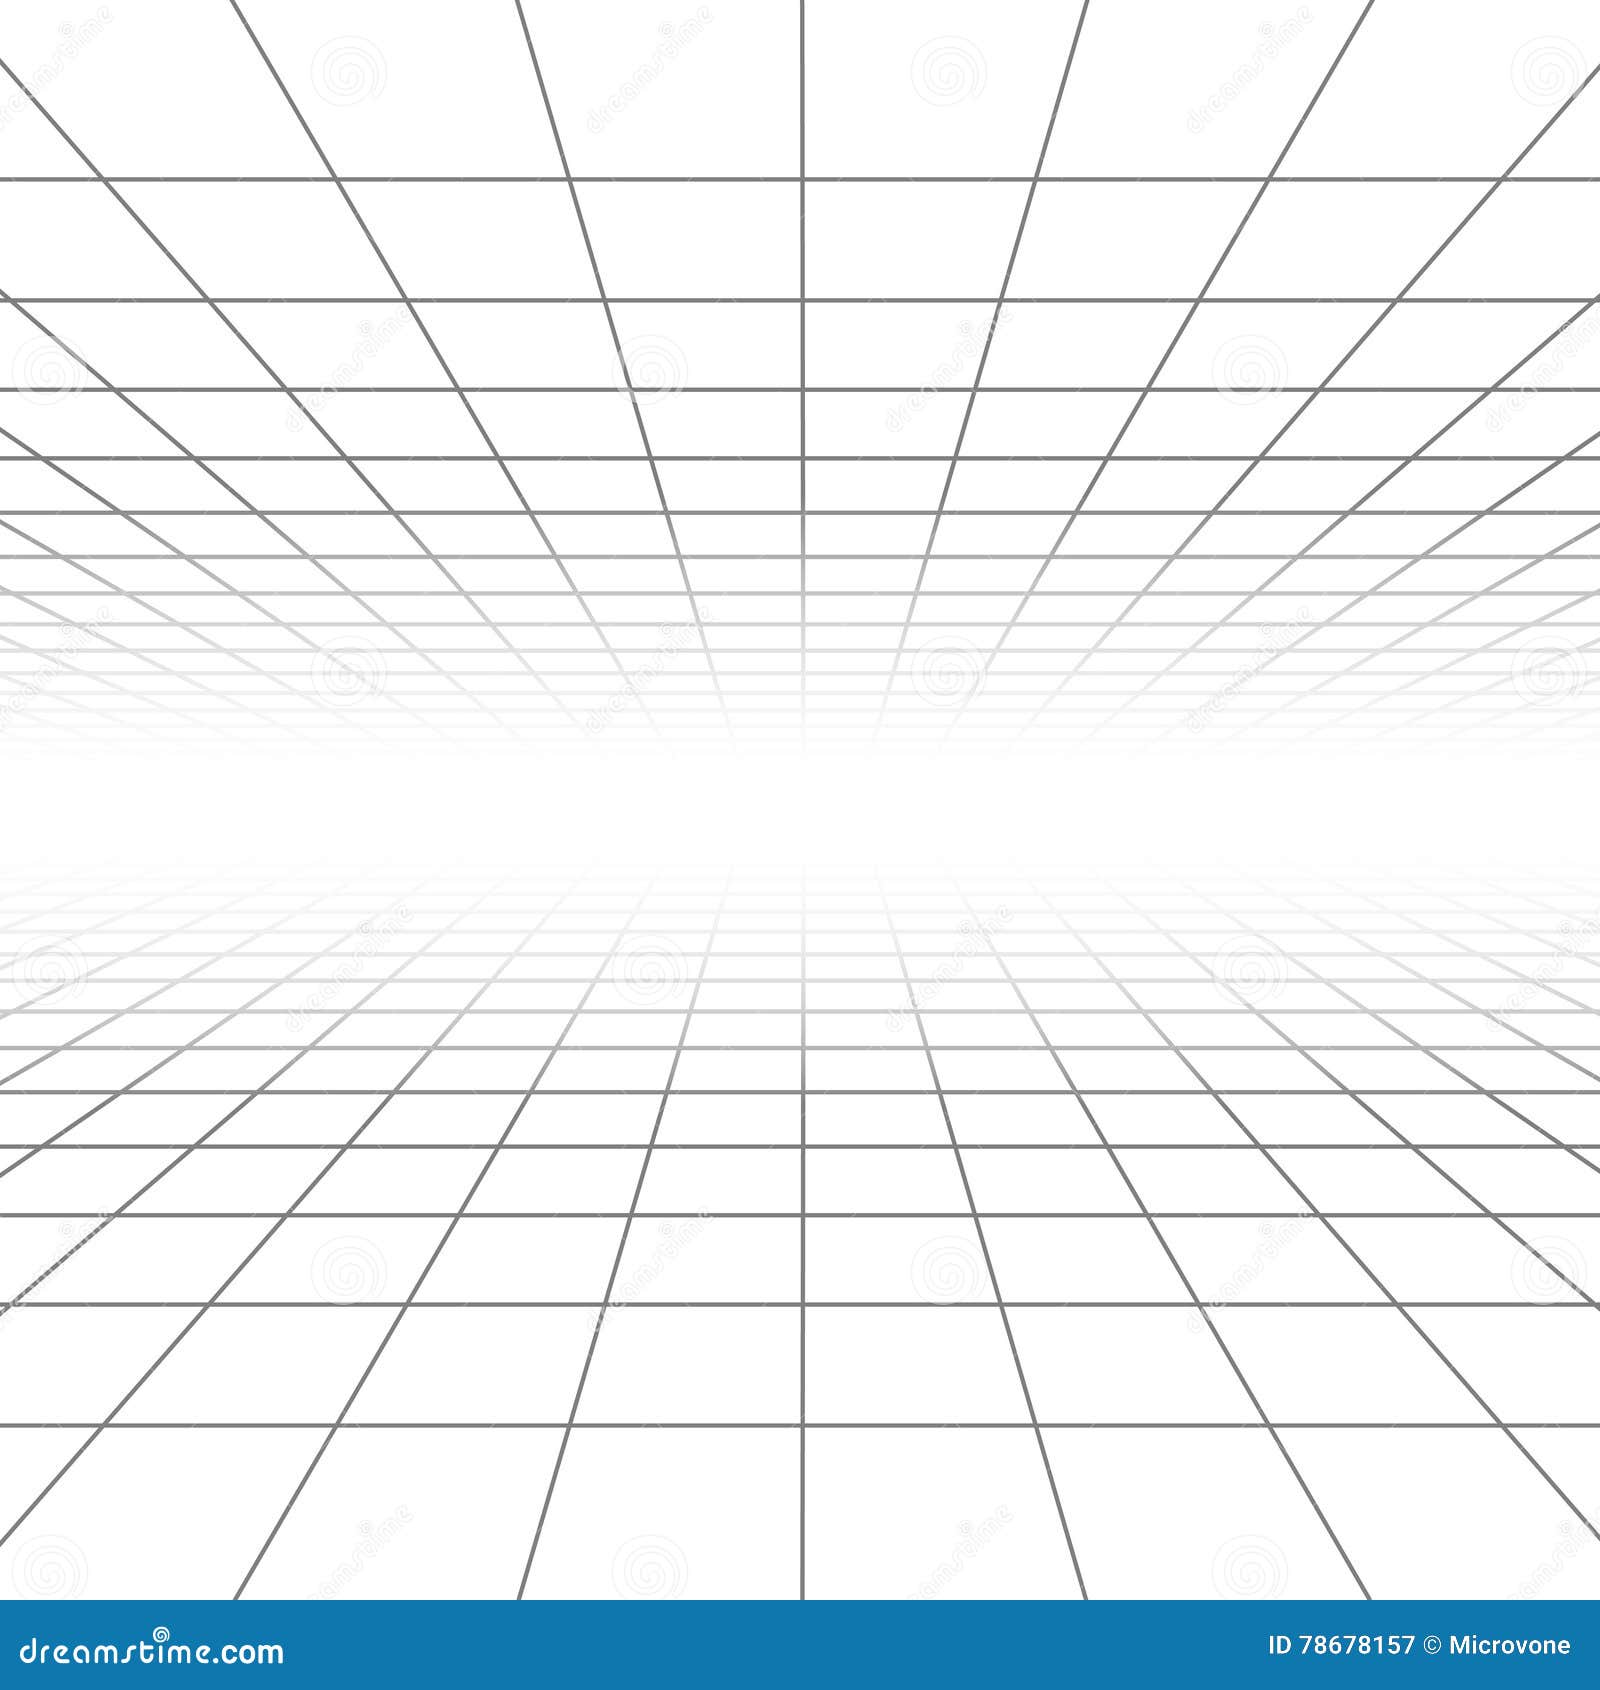 ceiling and floor perspective grid  lines, architecture wireframe